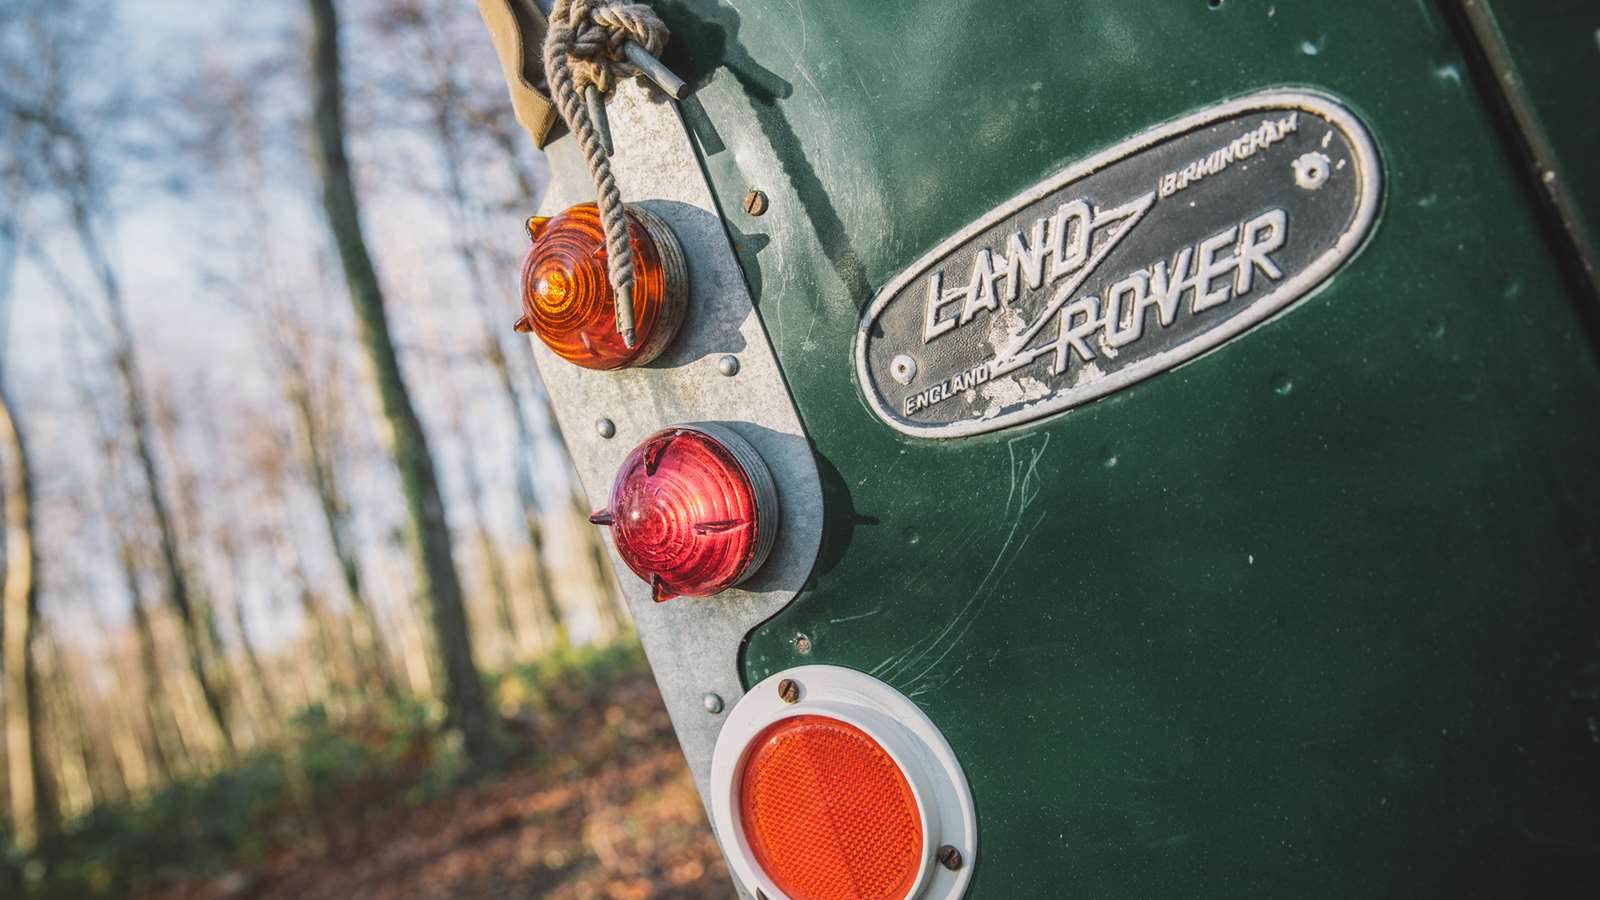 The back end of a classic Land Rover as part of the Goodwood Off-Road Experience art Goodwood Motor Circuit.